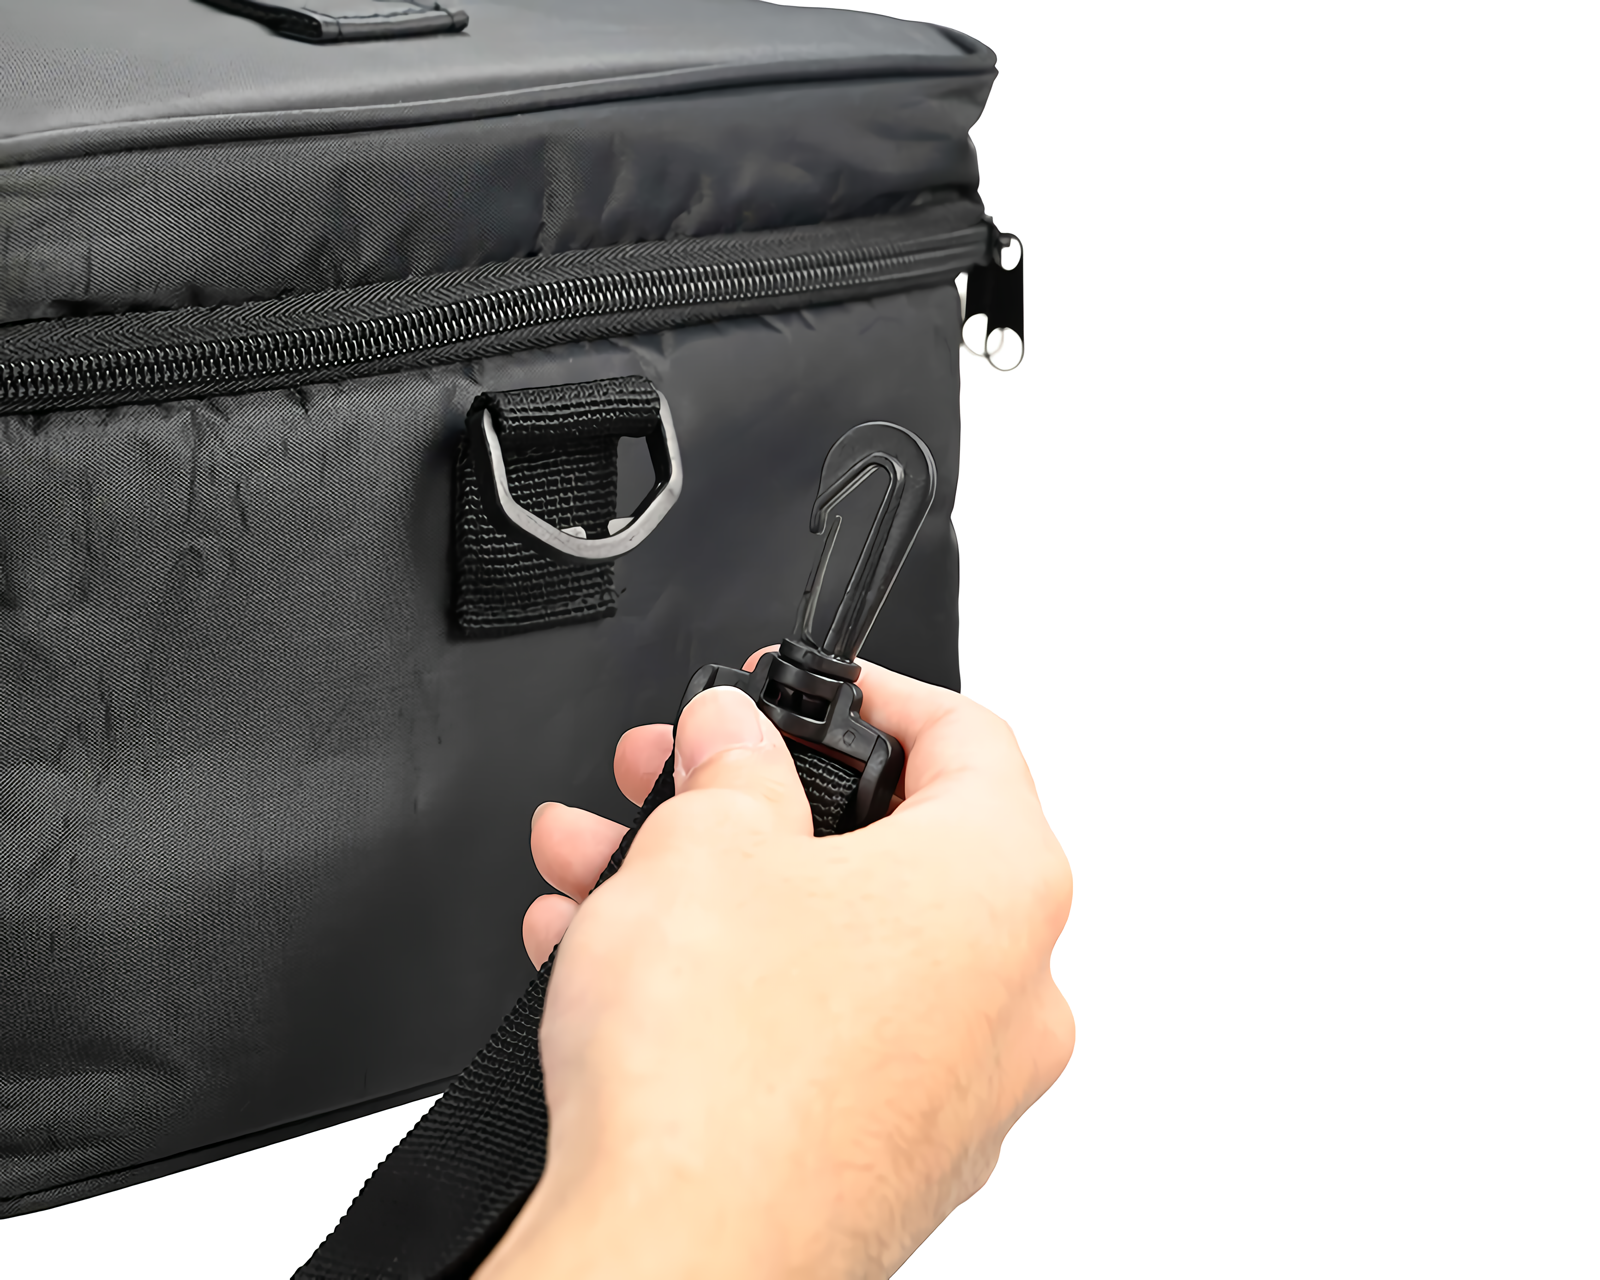 Side view of black bag demonstrating the black strap can be unclipped.